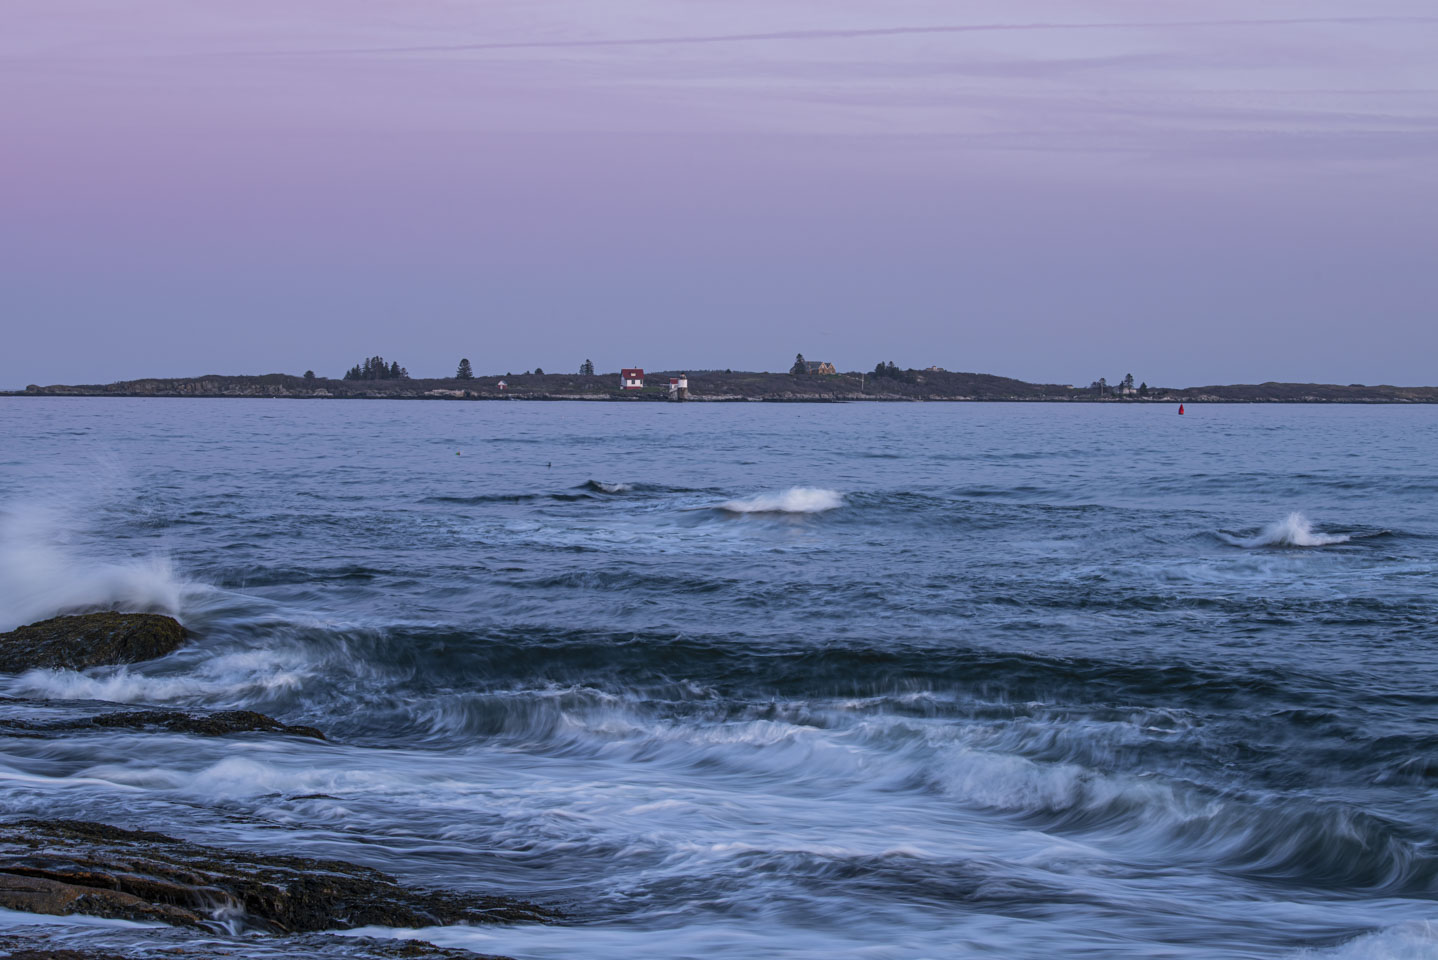 Ram Island Lighthouse in the evening